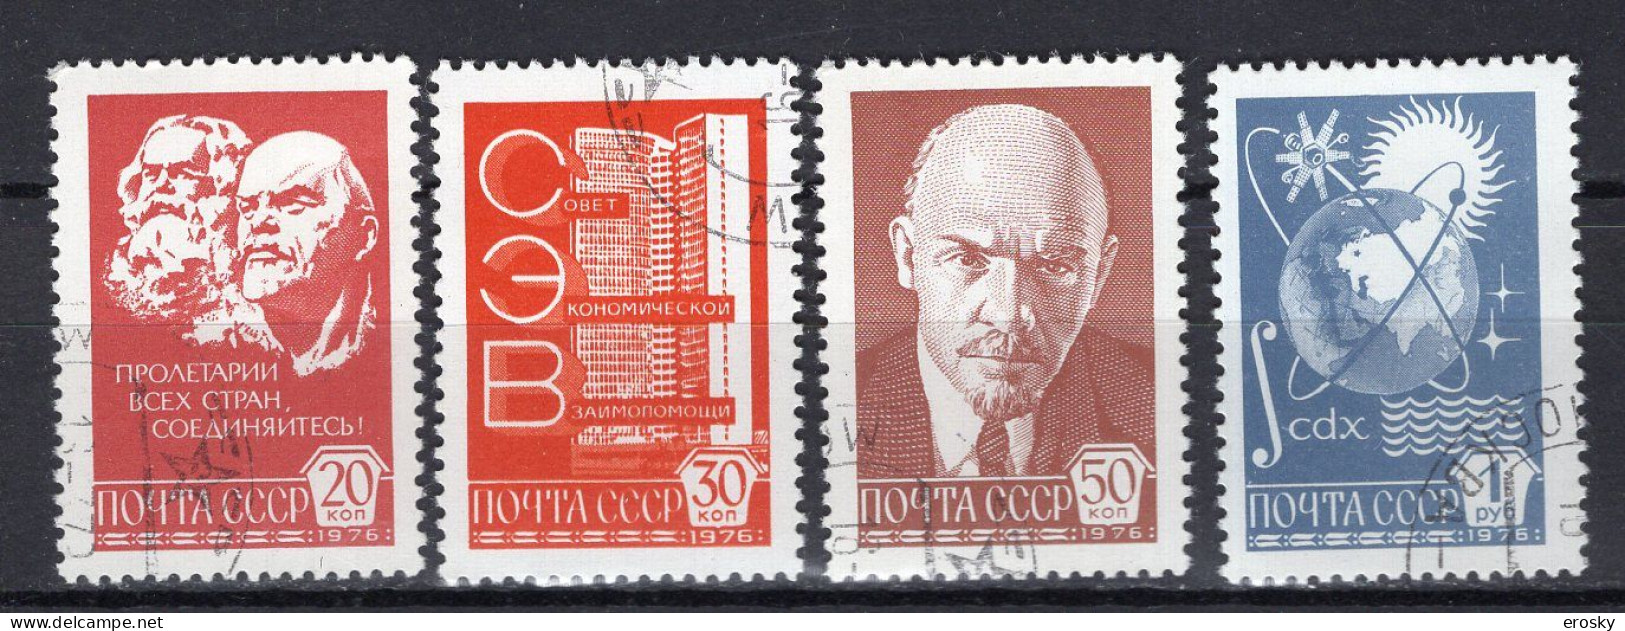 S4955 - RUSSIE RUSSIA Yv N°4400/403 - Usados